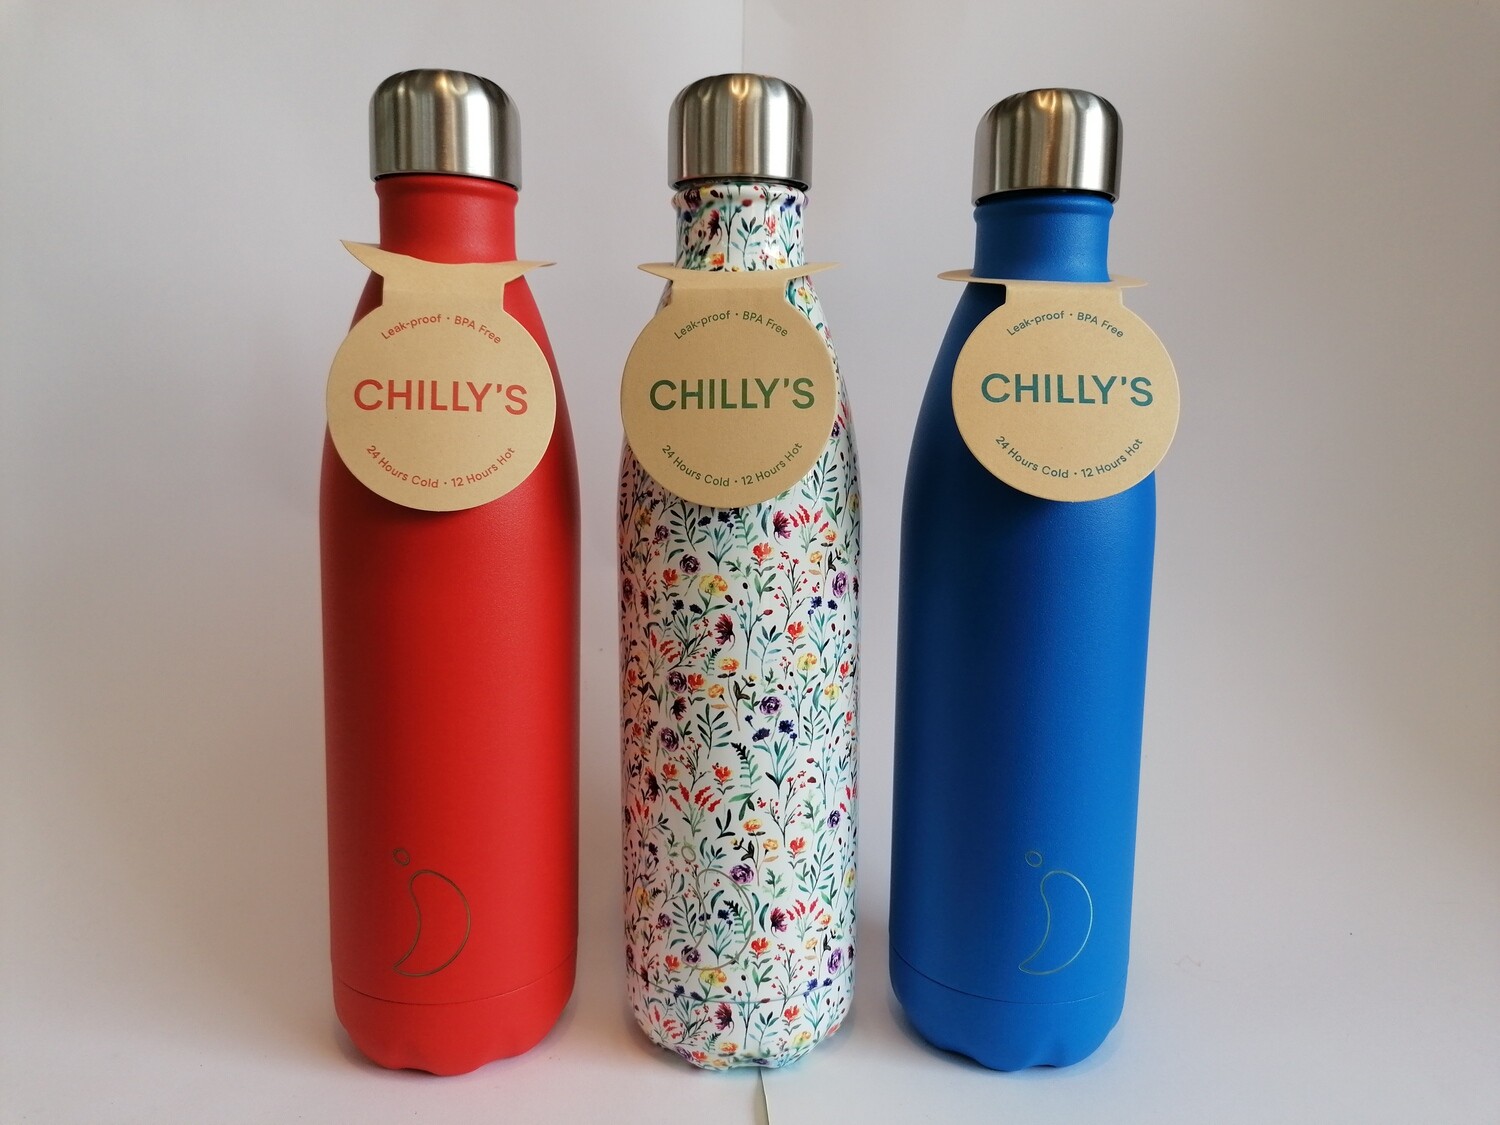 Chilly's 750ml